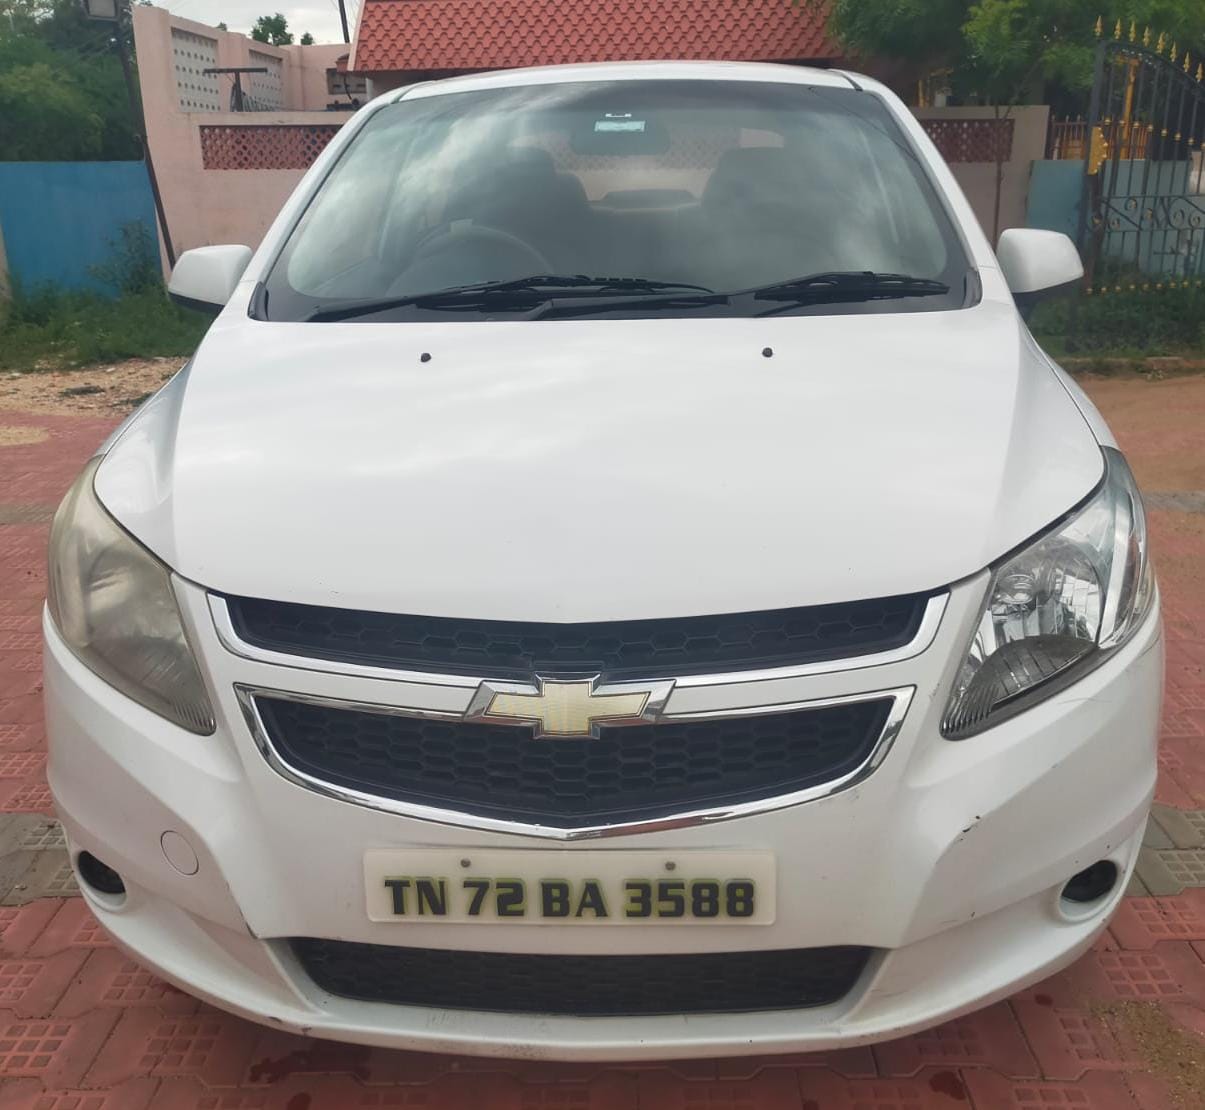 Used-Chevrolet-Sail-Cars-in-MADURAI-Second-Chevrolet-Sail-Cars-in-MADURAI-Per-Owned-Chevrolet-Sail-Cars-in-MADURAI